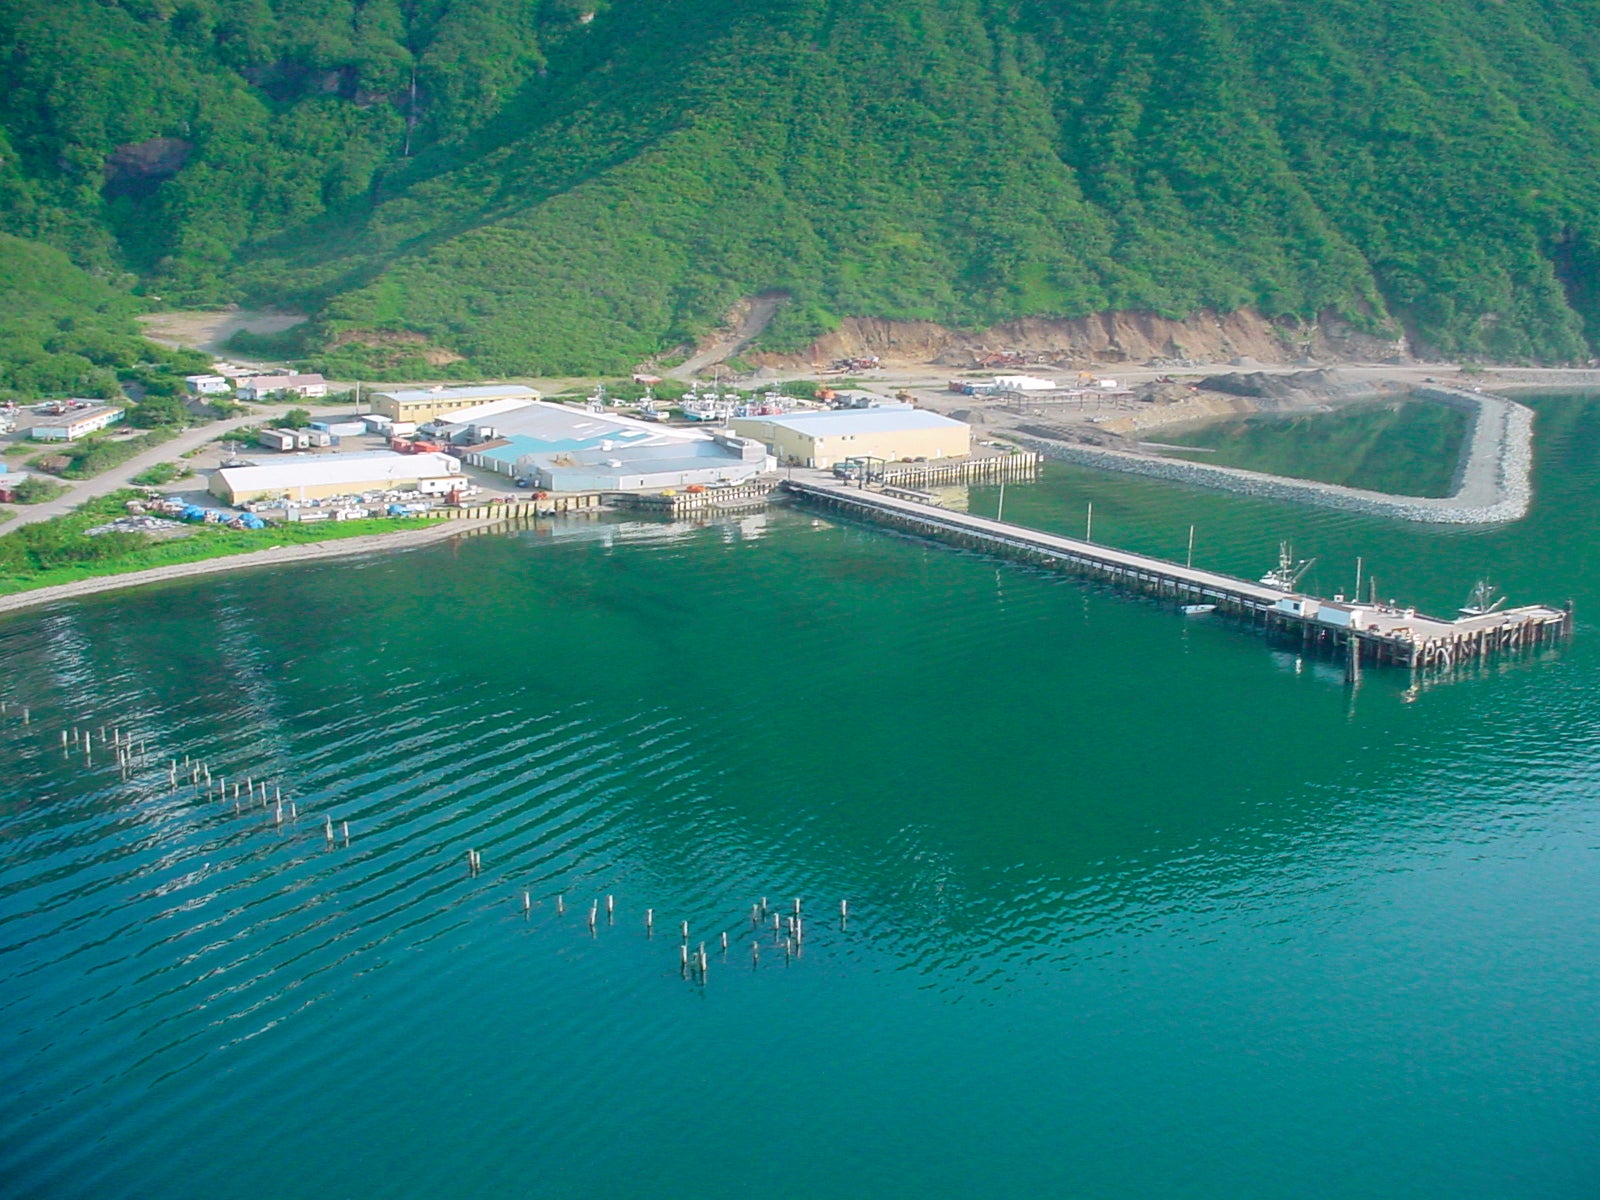 Chignik, Alaska plant viewed from above.